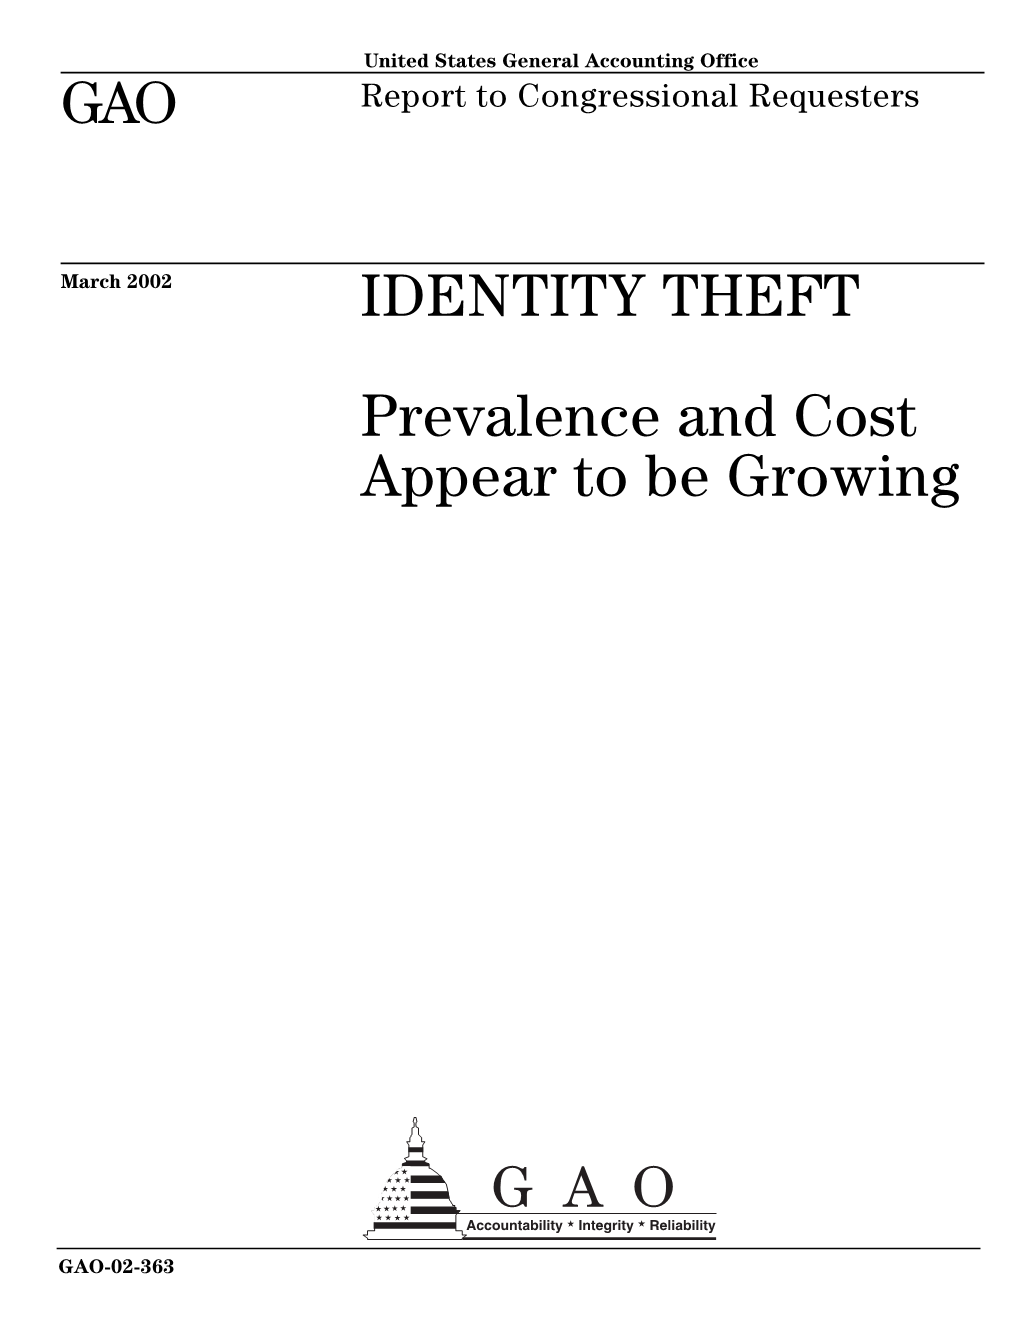 GAO-02-363 Identity Theft: Prevalence and Cost Appear to Be Growing